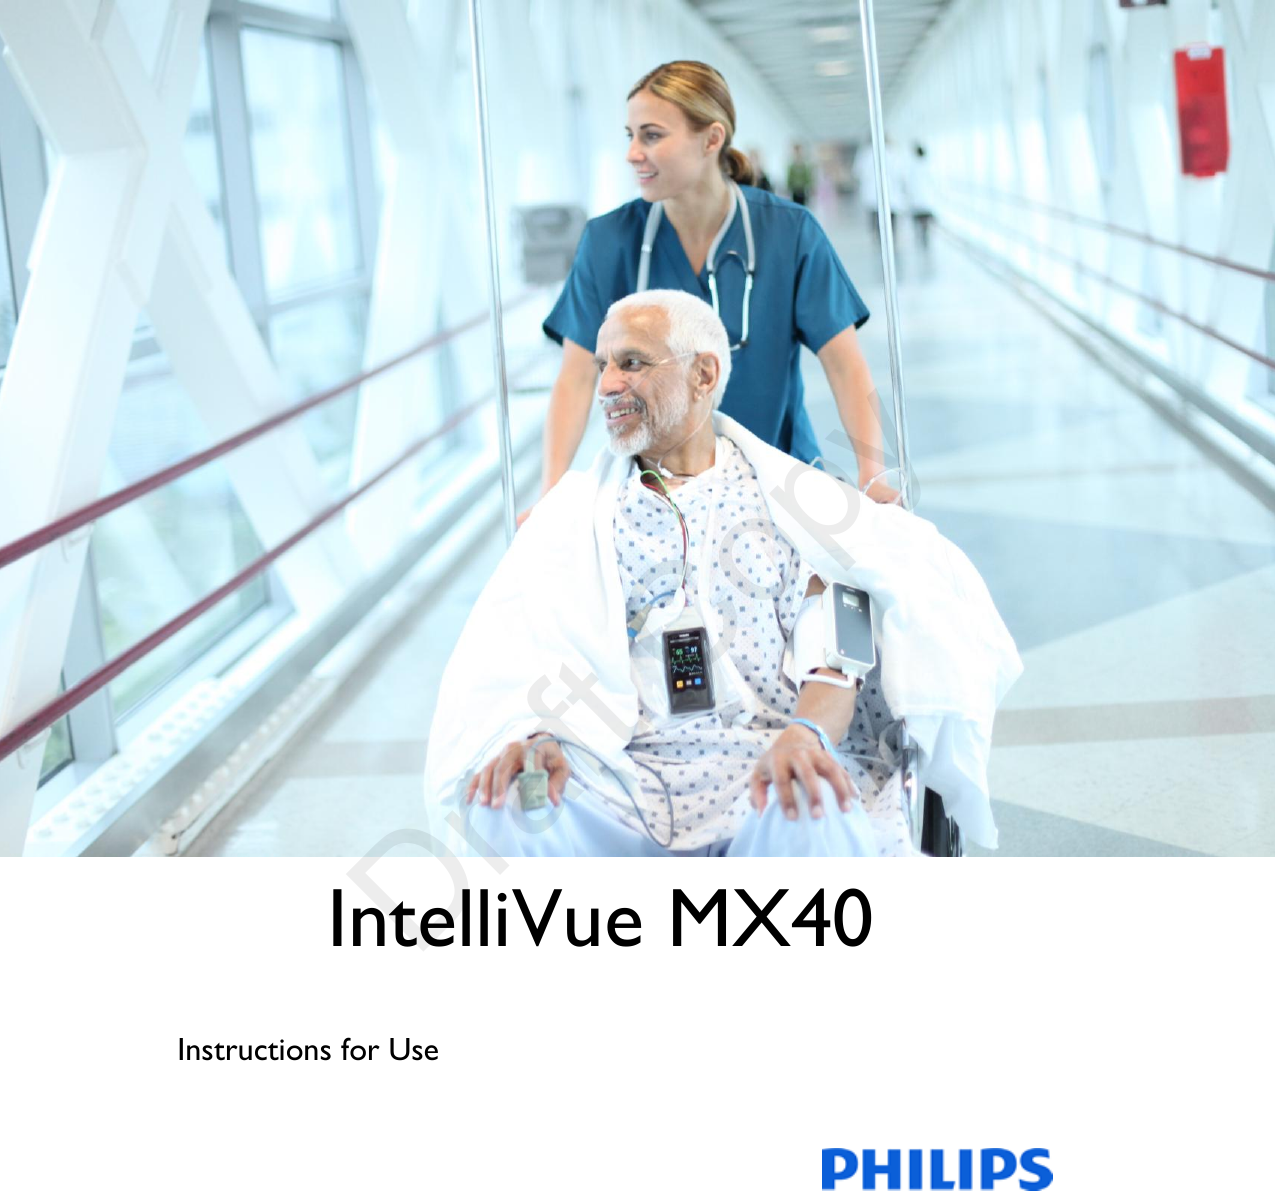    IntelliVue MX40  Instructions for Use                    Draft Copy